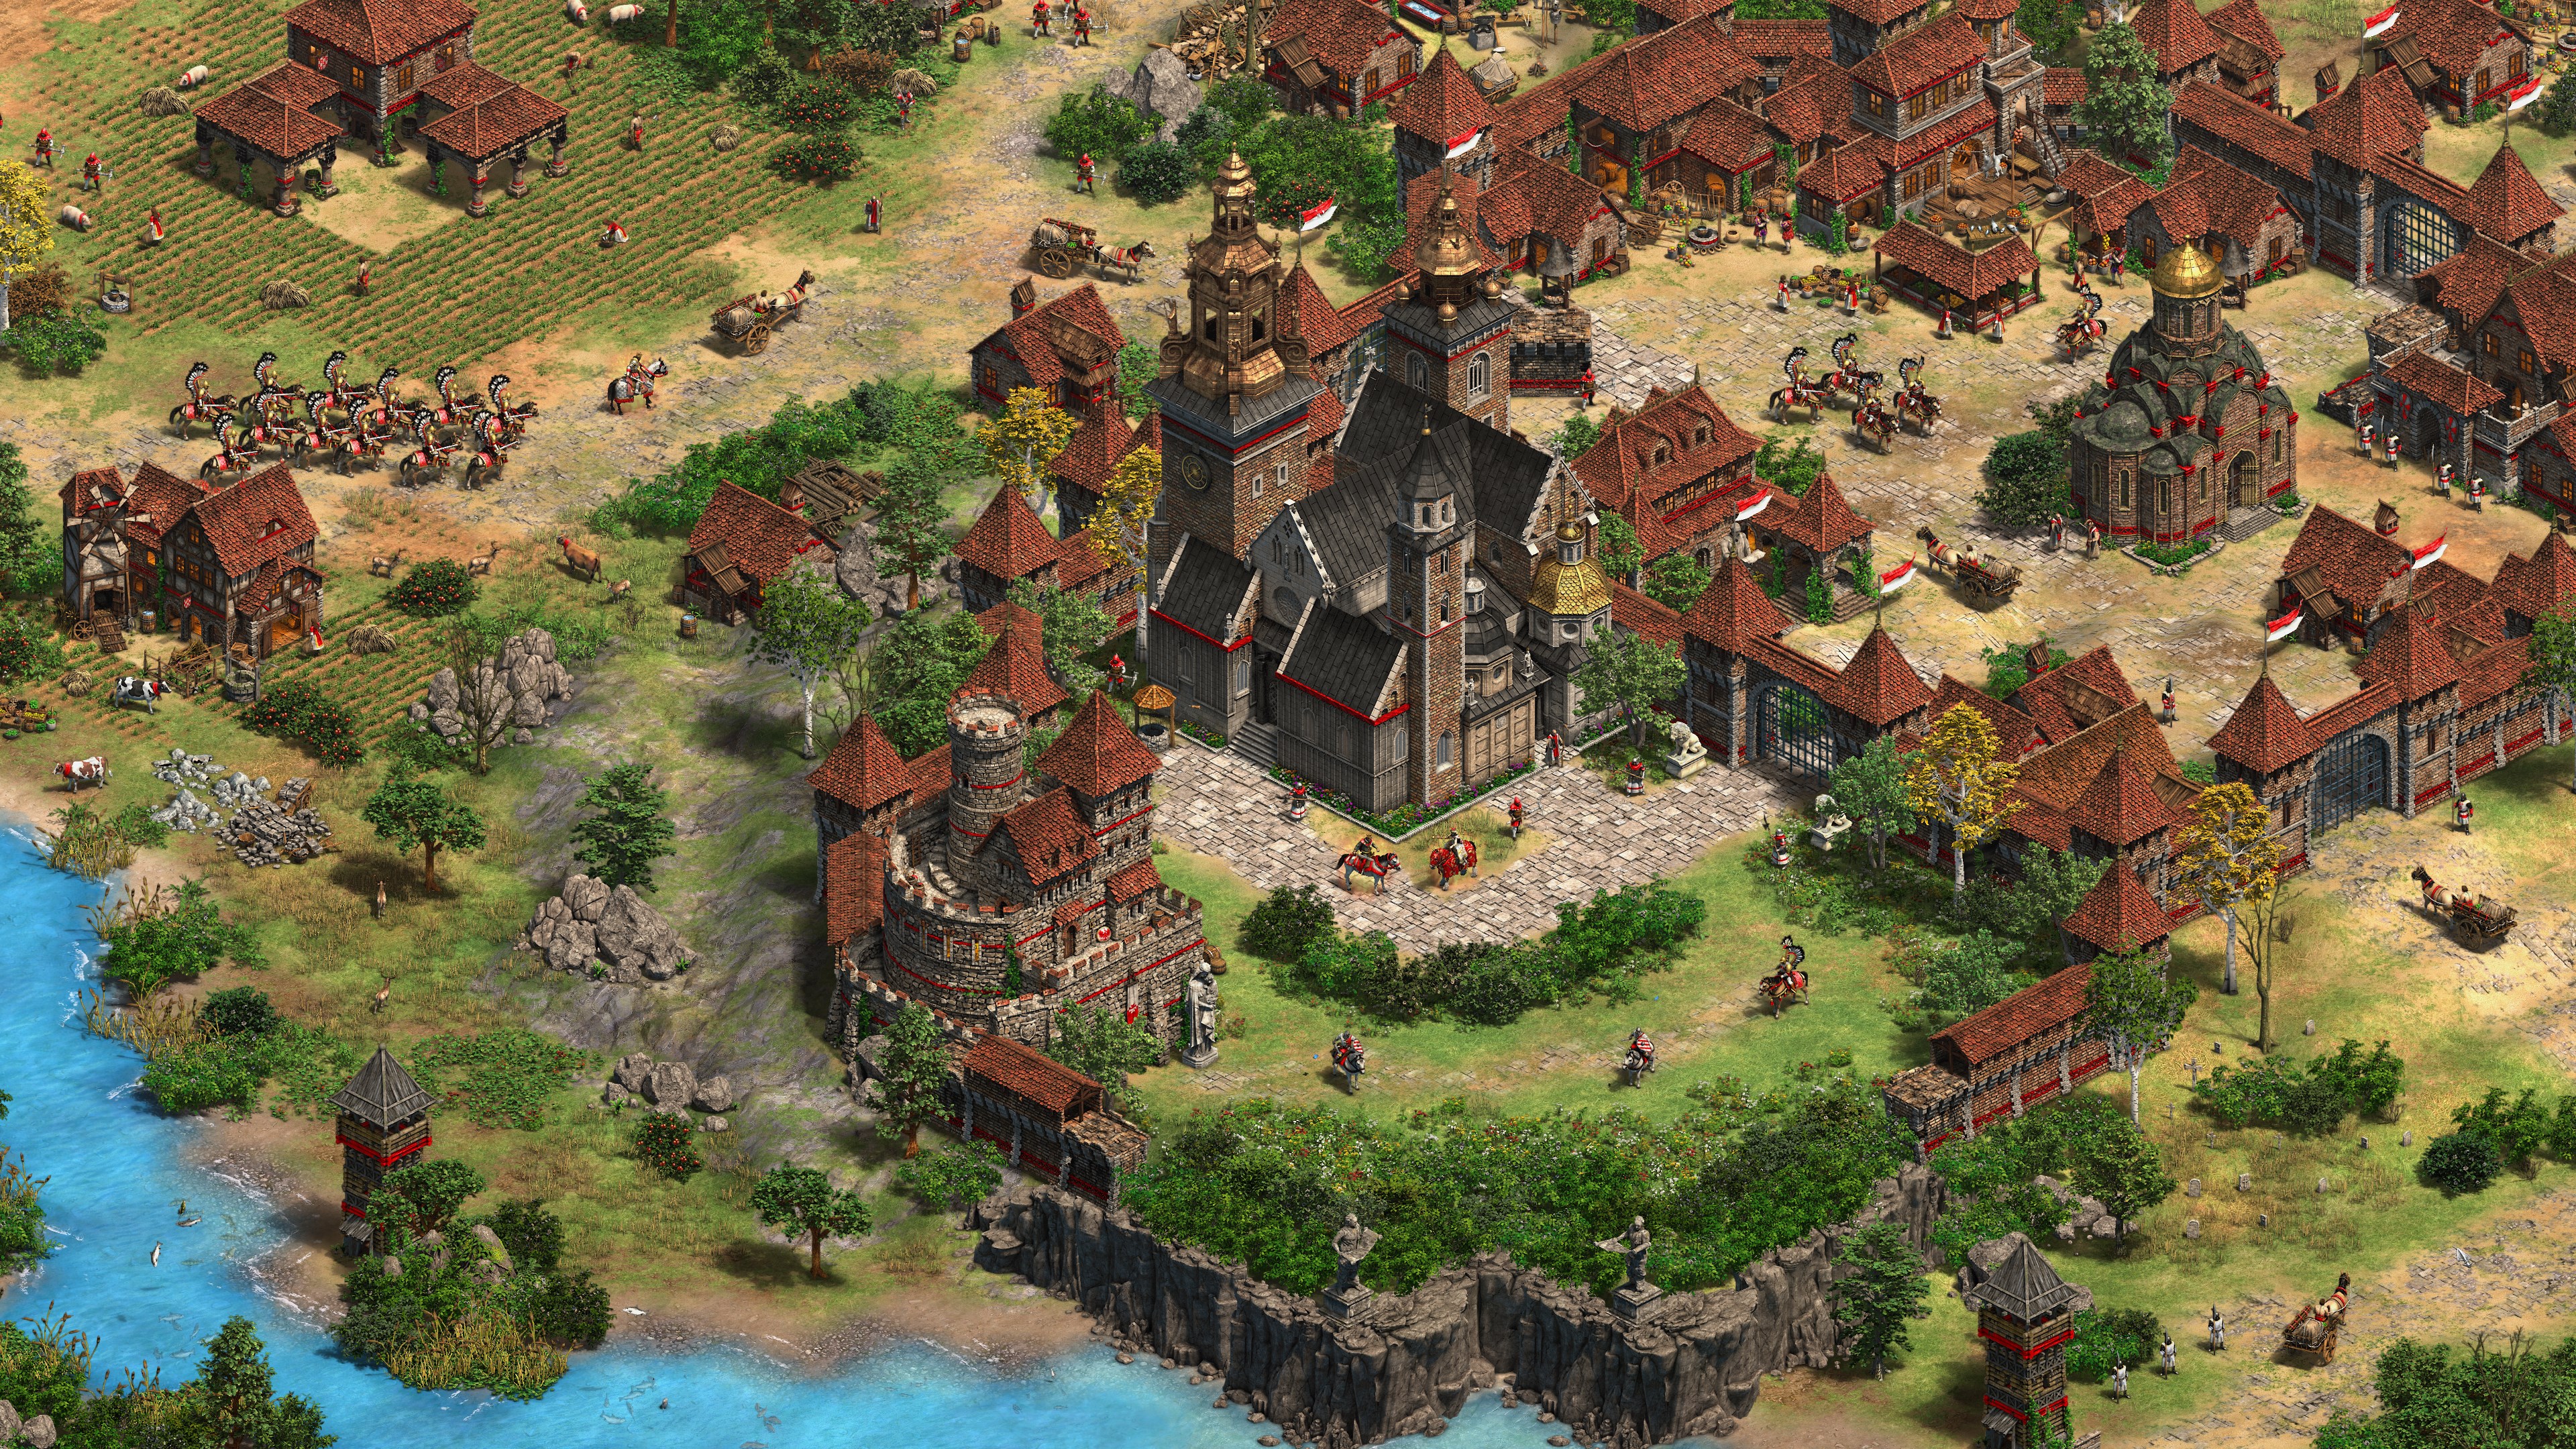 Age of Empires II: Definitive Edition - Dawn of the Dukes screenshot 45681